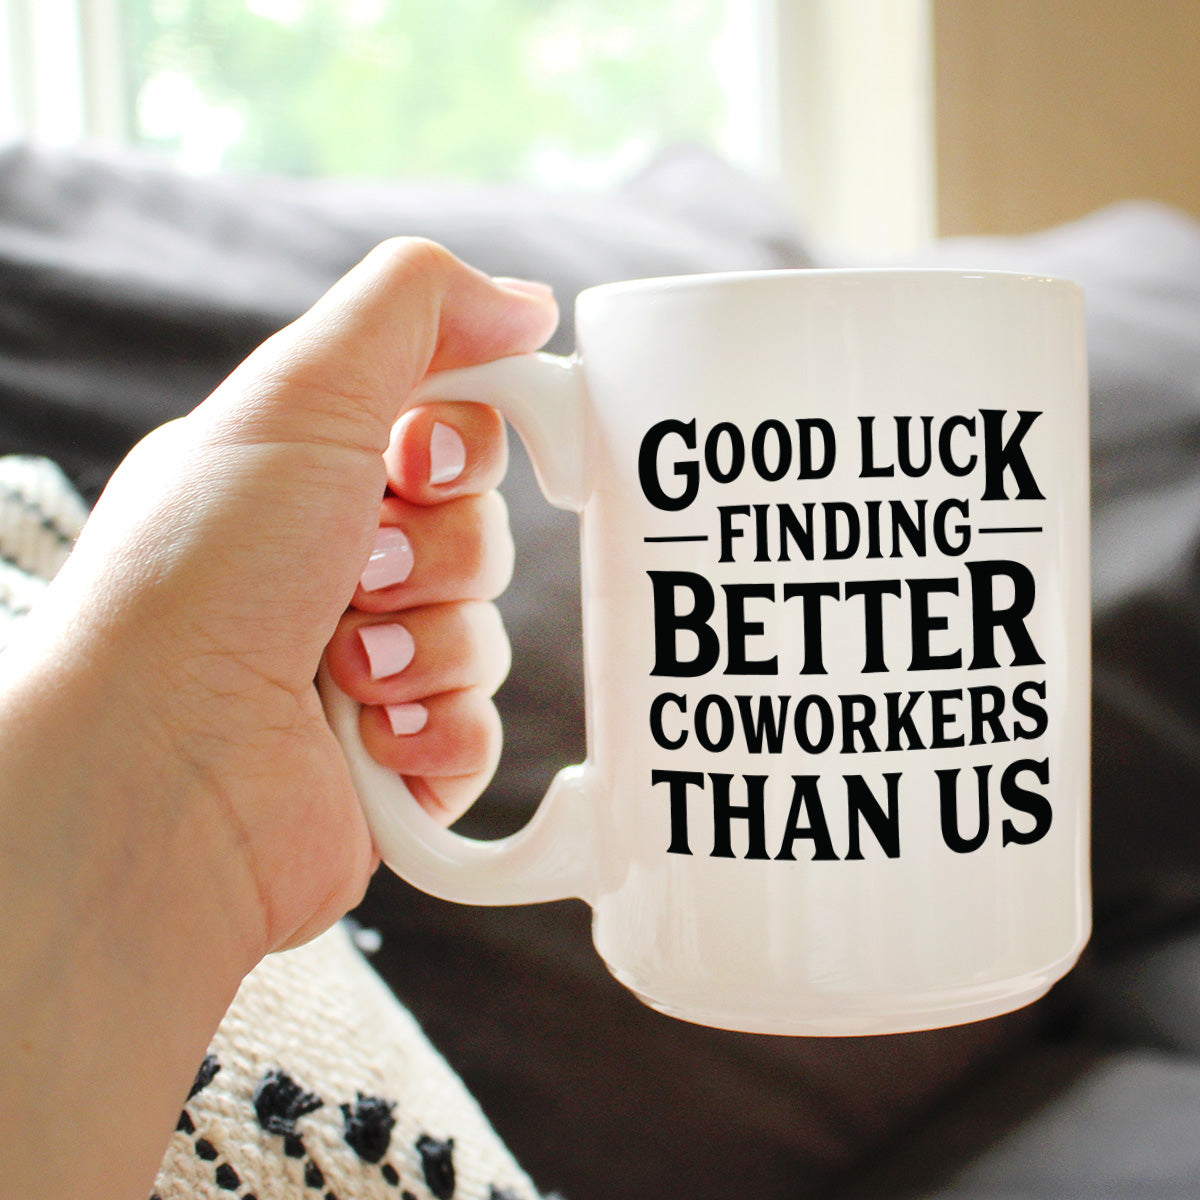 Good Luck Finding Better Coworkers Than Us - Funny Coffee Mug Gift for Coworker - Large 15 Oz Ceramic Coffee Cup